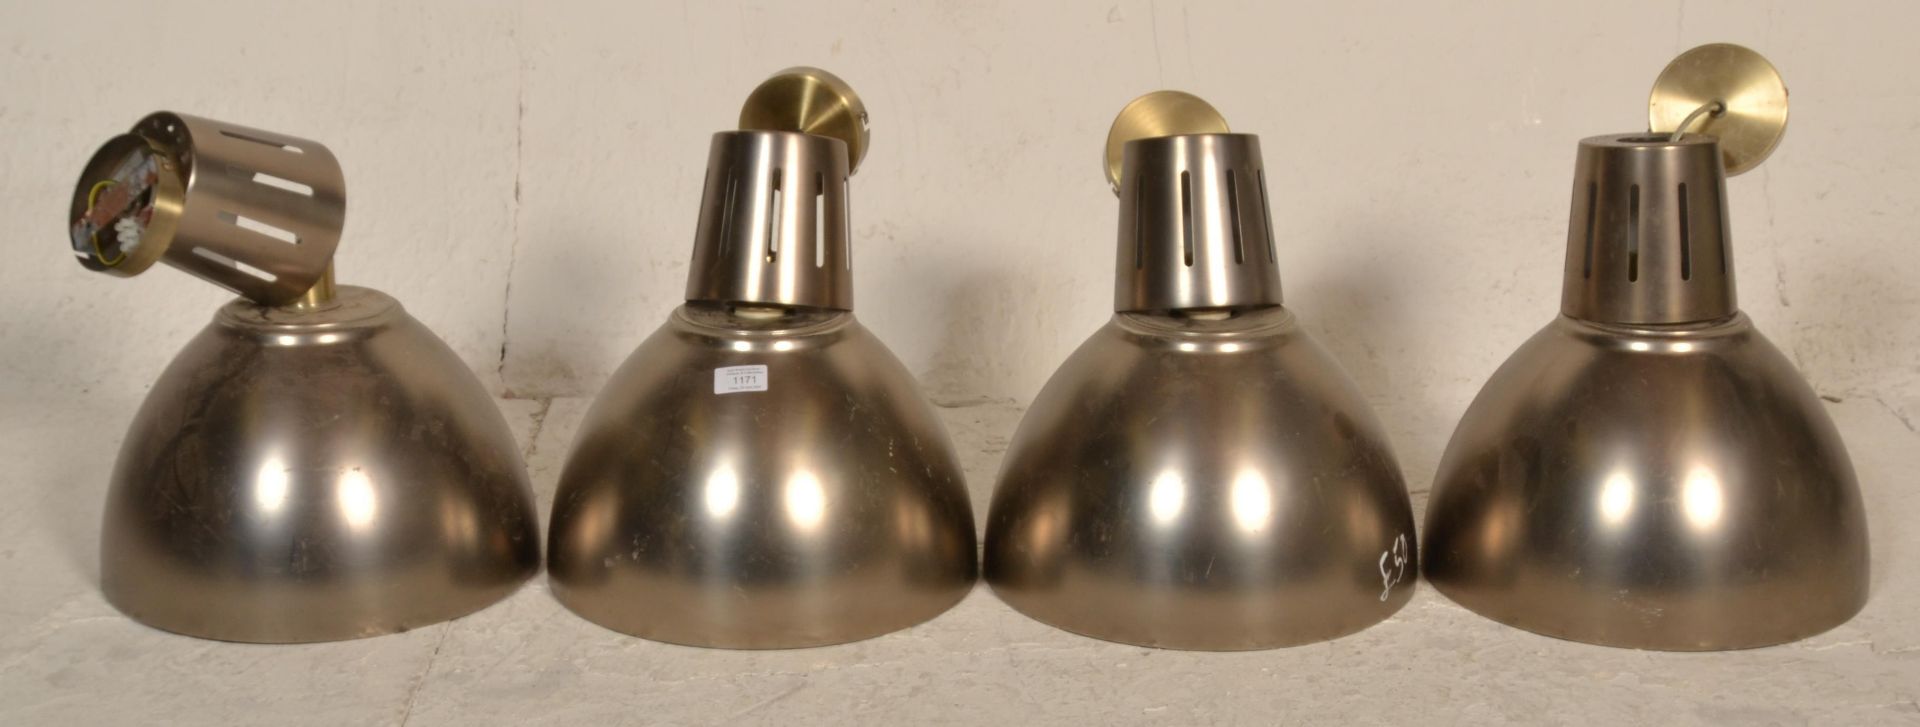 A set of 4 contemporary factory / Industrial style brushed gold aluminium pendant lights each with